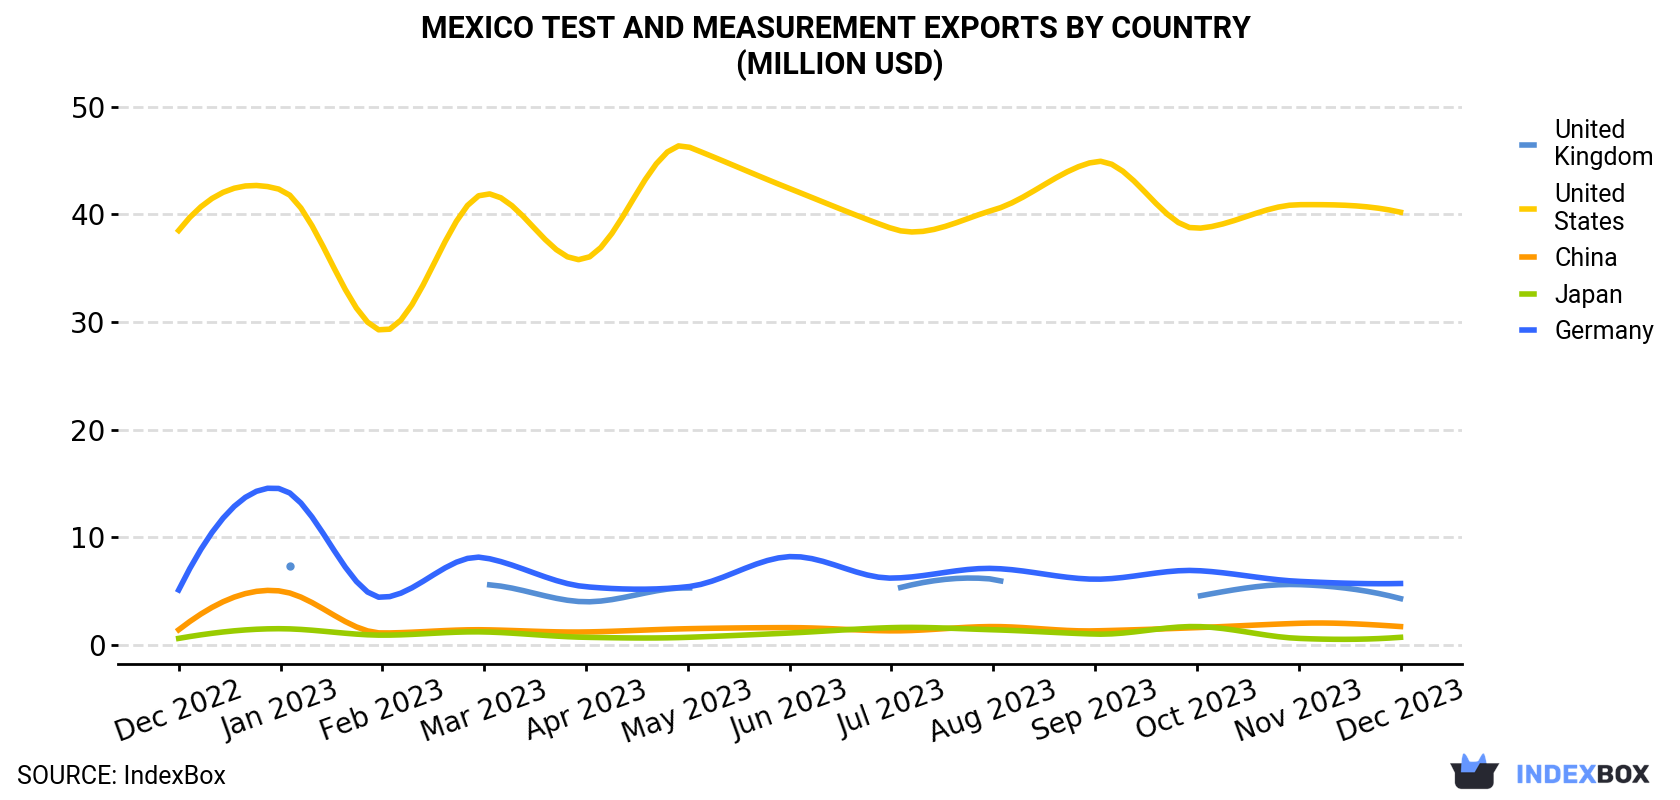 Mexico Test And Measurement Exports By Country (Million USD)